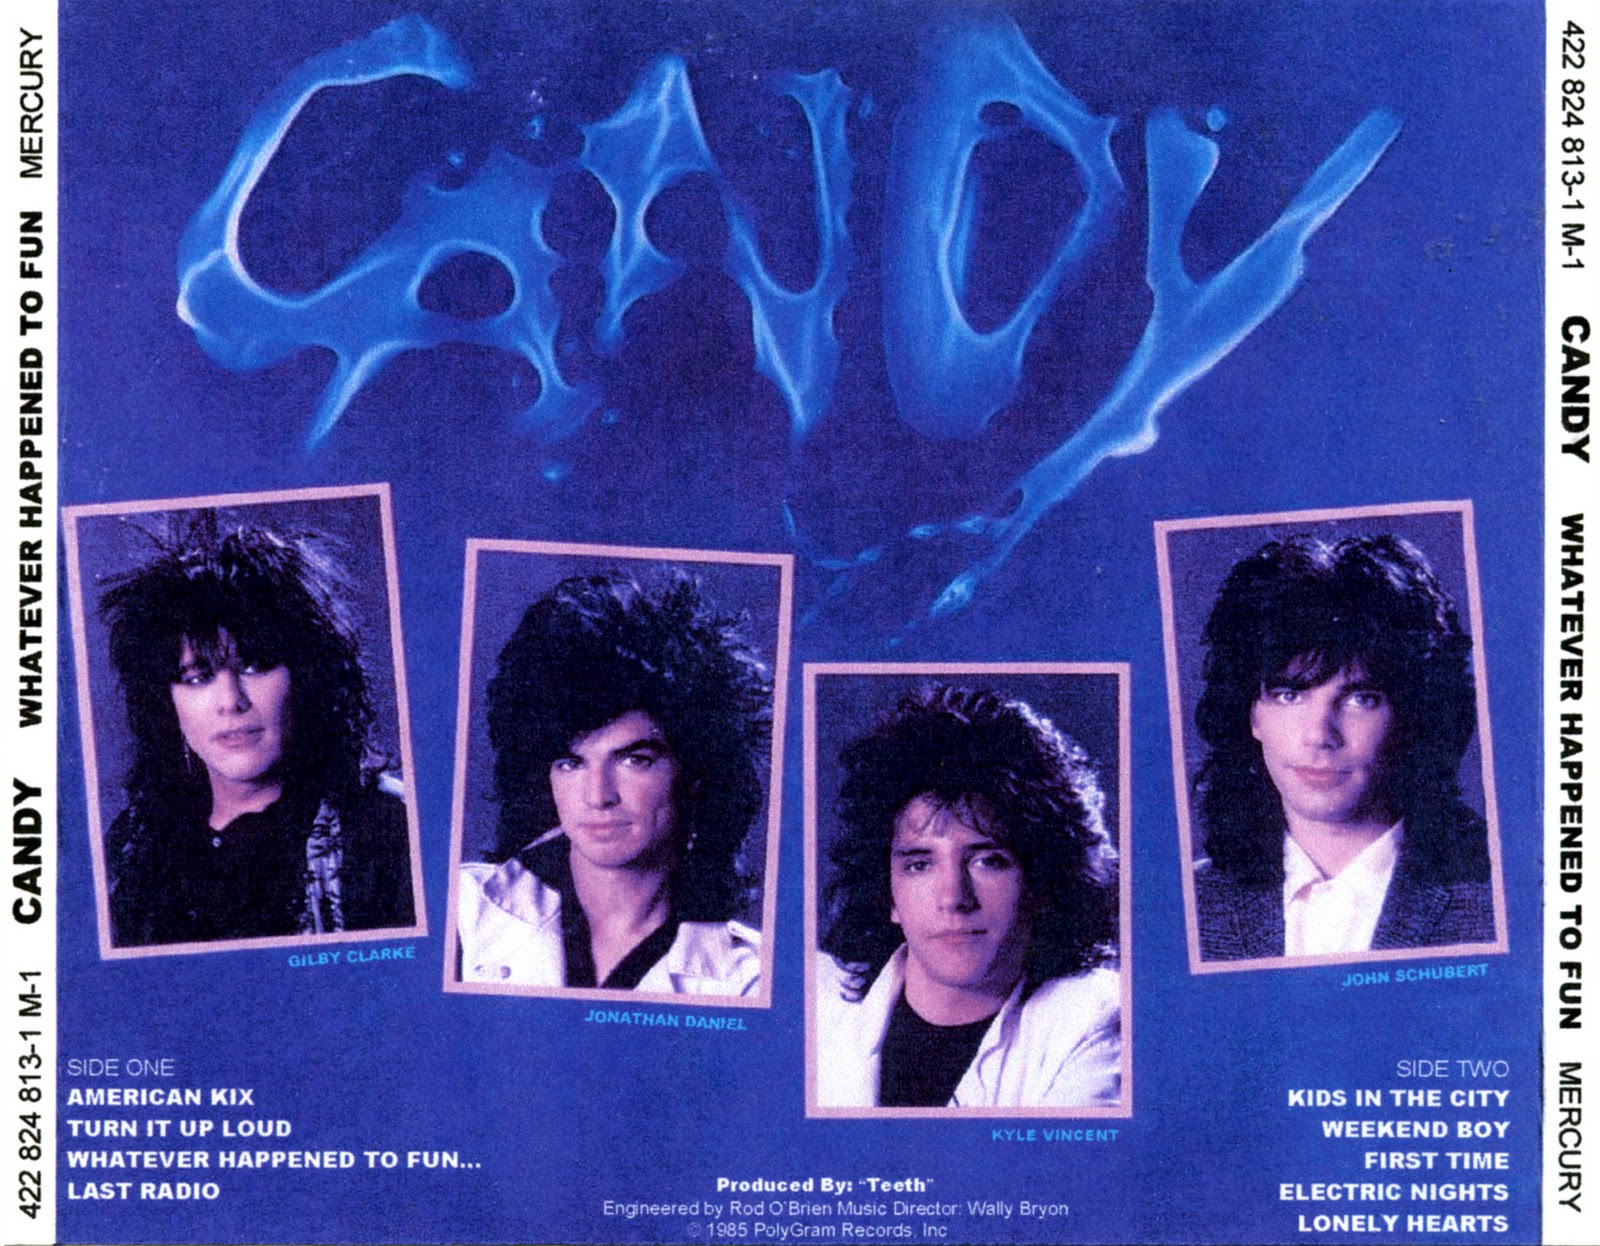 AOR Night Drive: CANDY (Gilby Clarke) - Whatever Happened To Fun